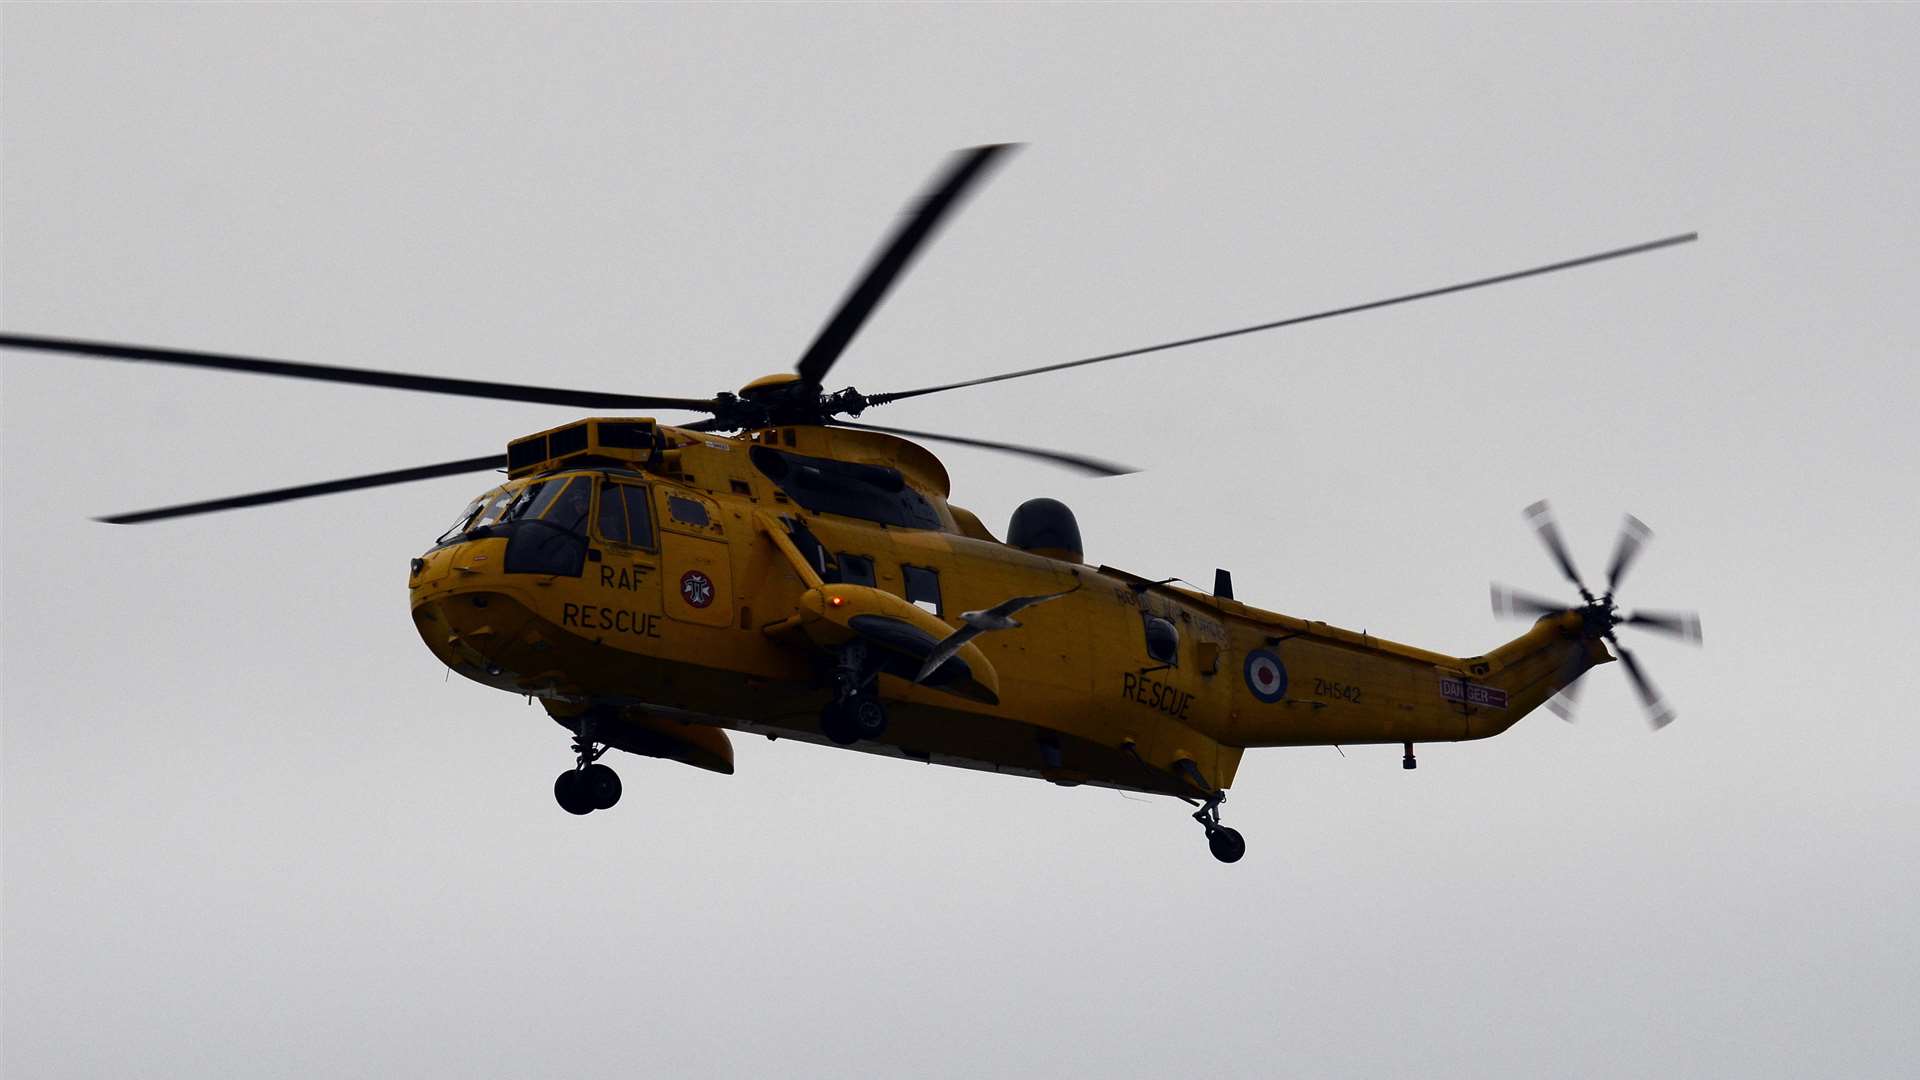 The RAF Sea King helicopter searching the coastline